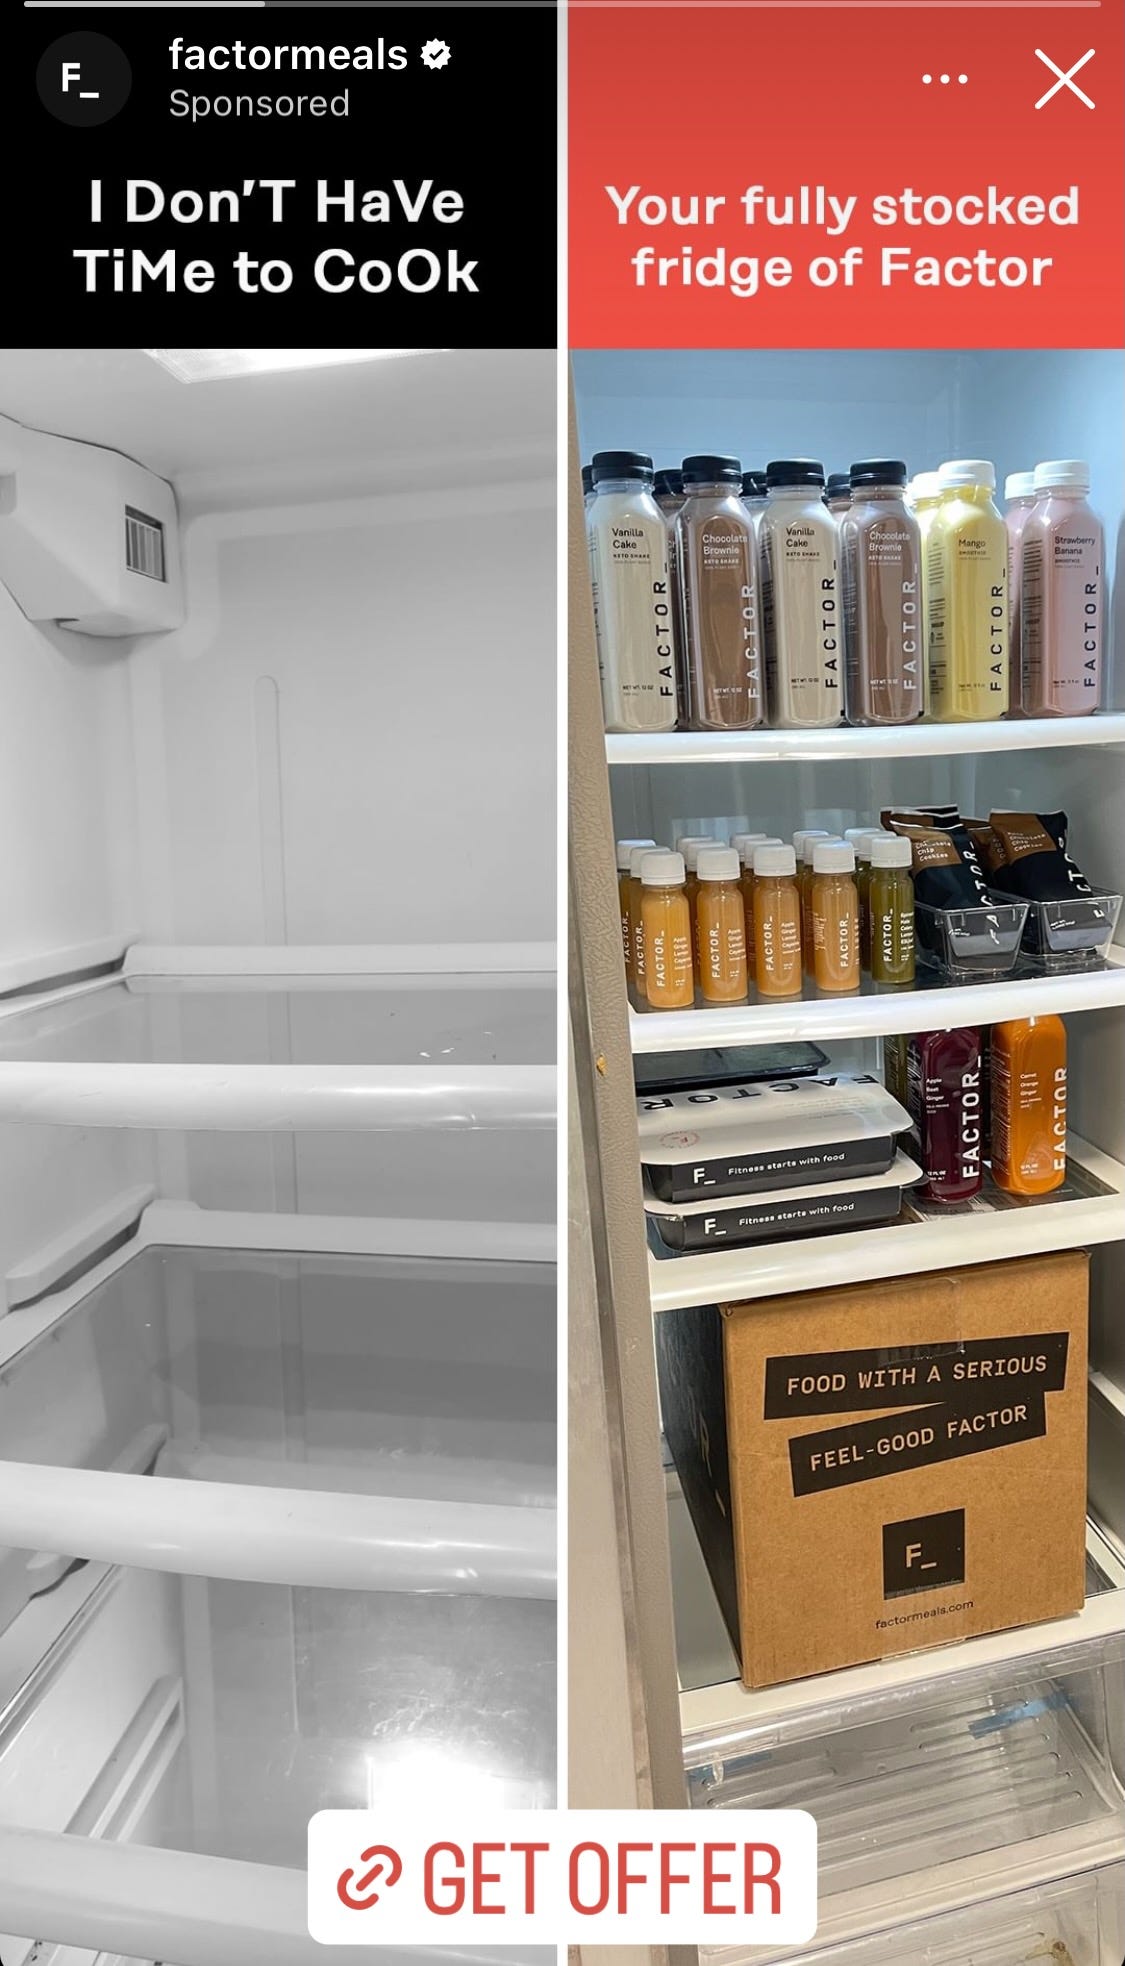 One ad recently showed two fridges side by side. On the left is an empty fridge with the caption "I Don'T HaVe TiMe to CoOk." On the right, problem solved, here's a fridge filled with thirteen rows of bottled smoothies and wellness shots, plus other containers of food, and the caption "Your fully stocked fridge of Factor."